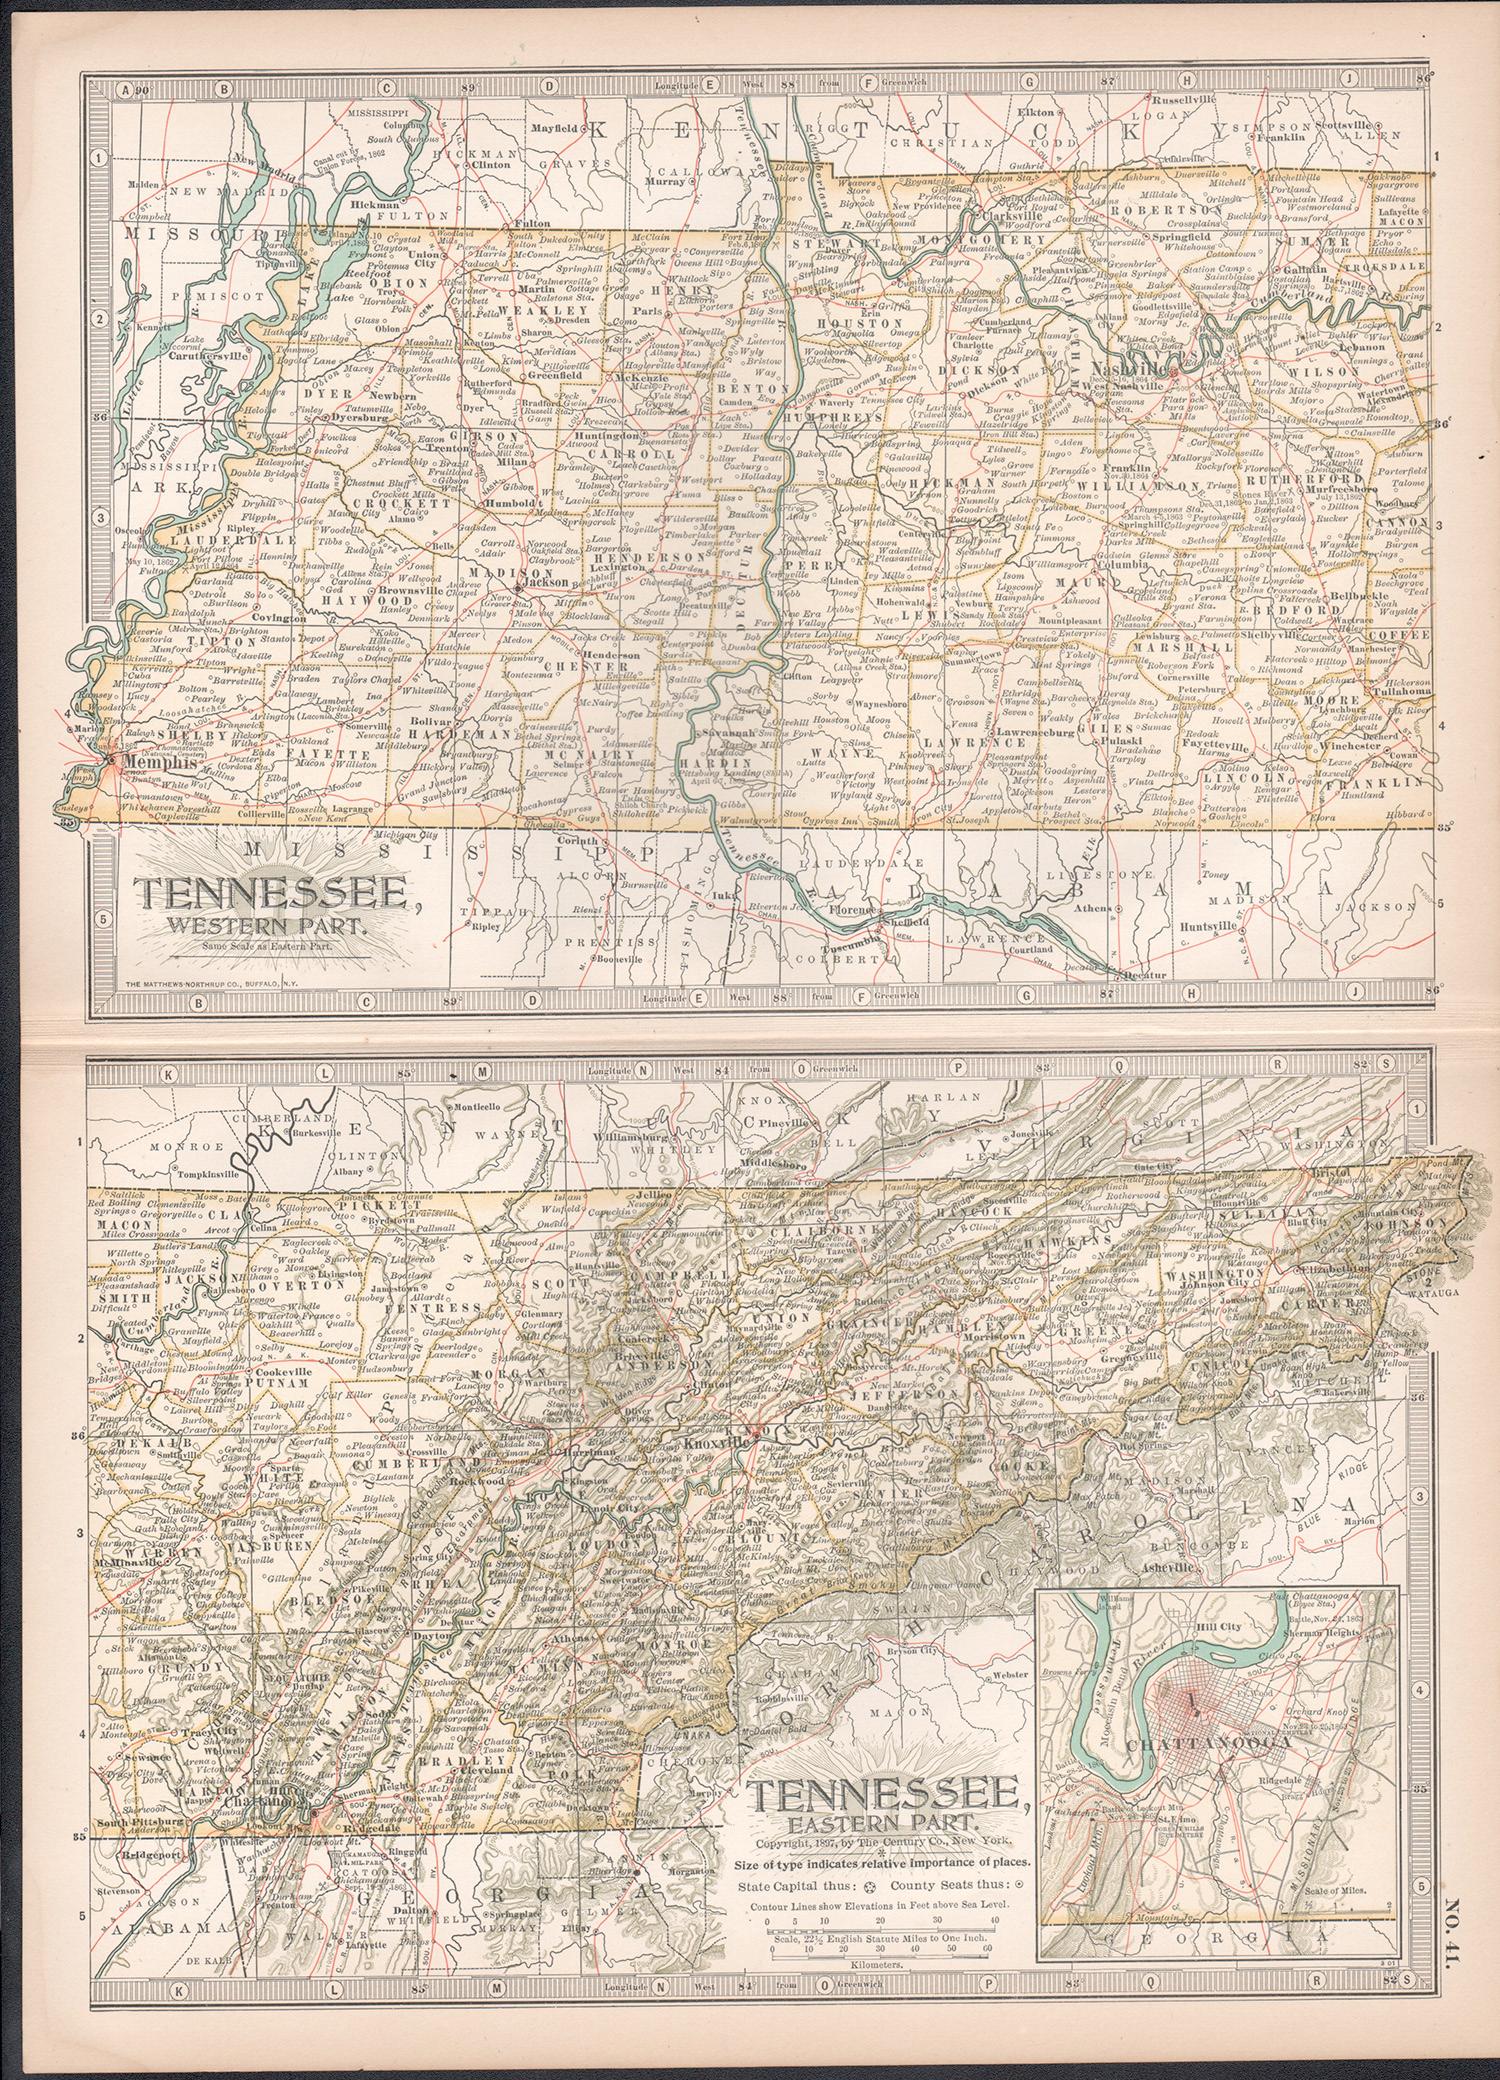 Tennessee. USA Century Atlas state antique vintage map - Print by Unknown